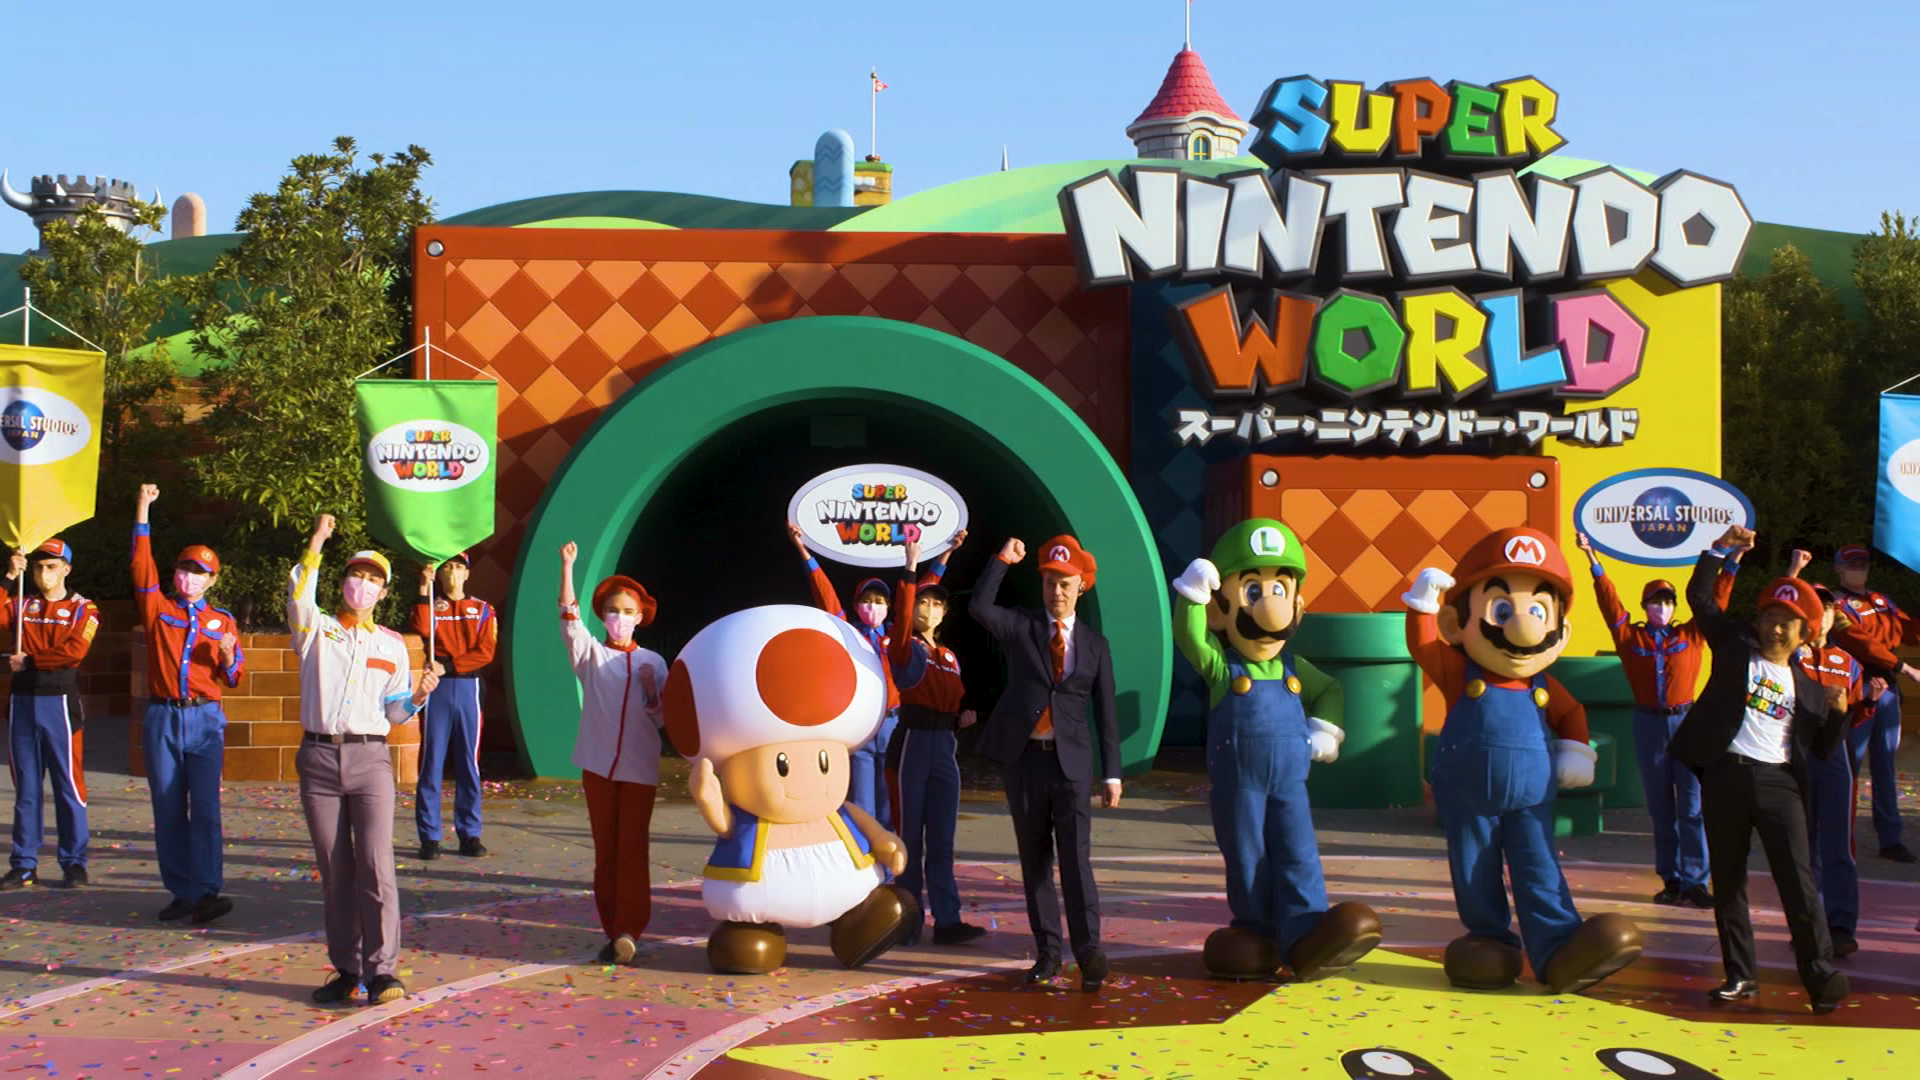 Universal Super Nintendo World, All you need to know